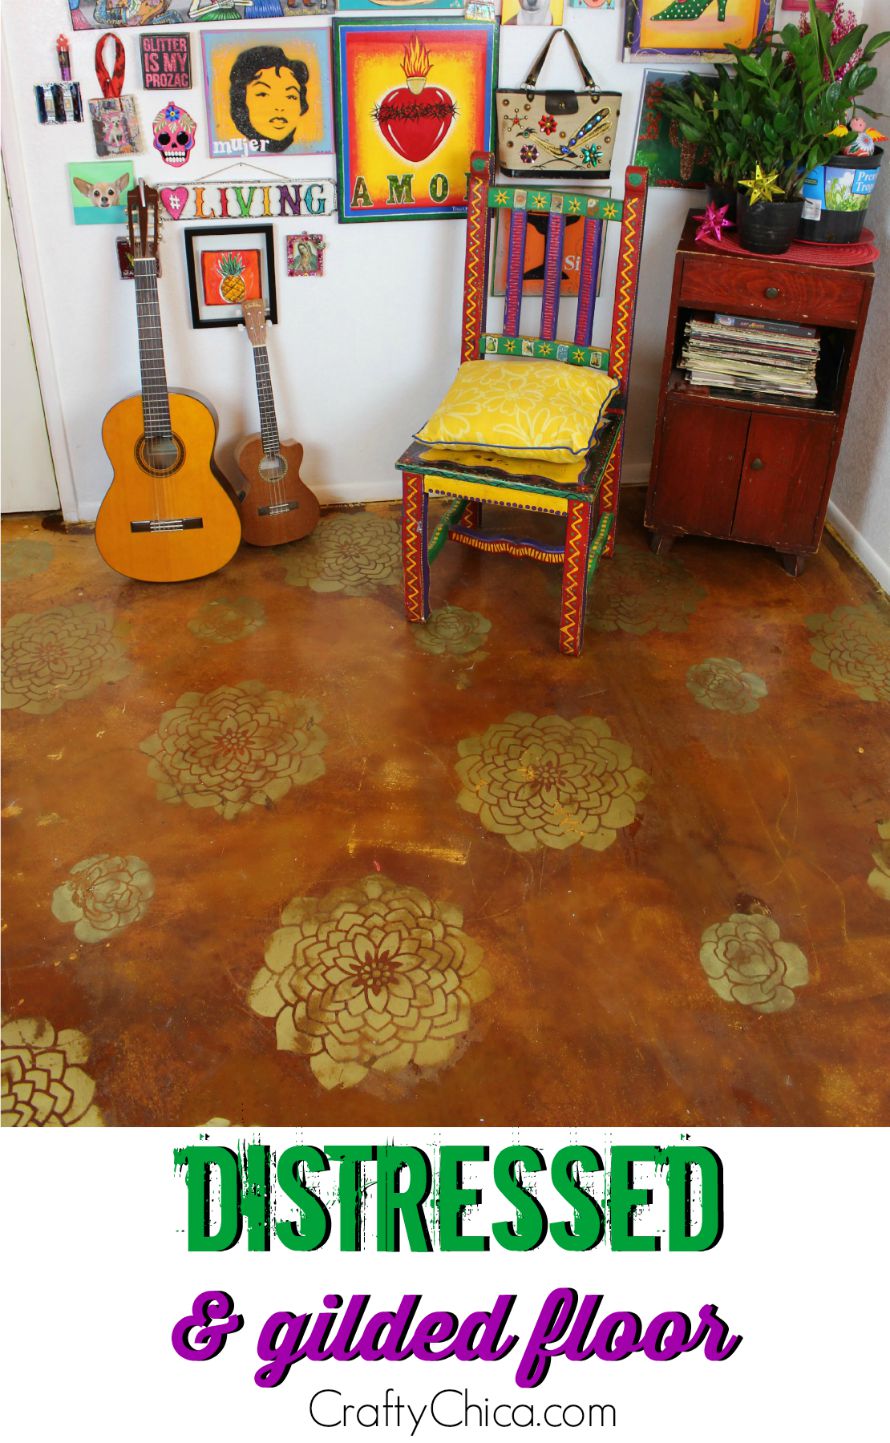 Create the look of a distrssed and gilded floor by CraftyChica.com